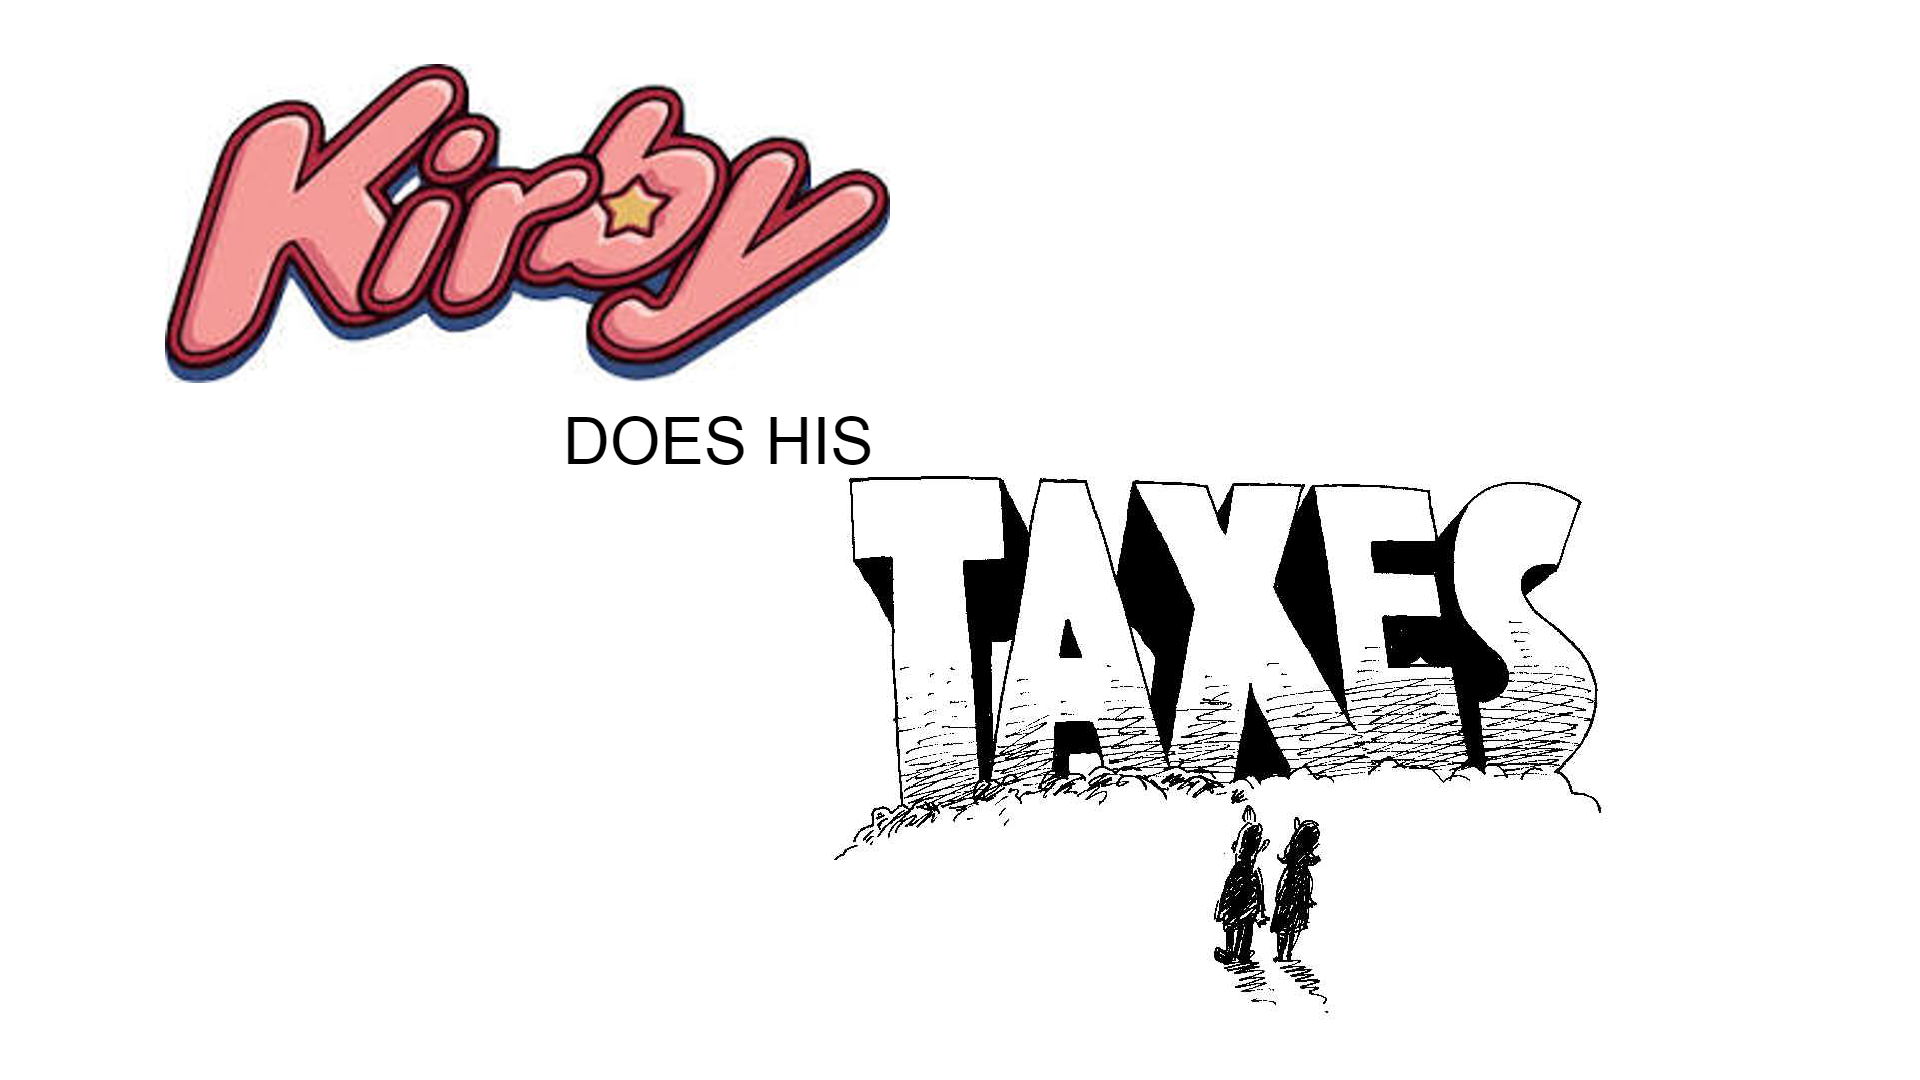 KIRBY PAYS HIS TAXES